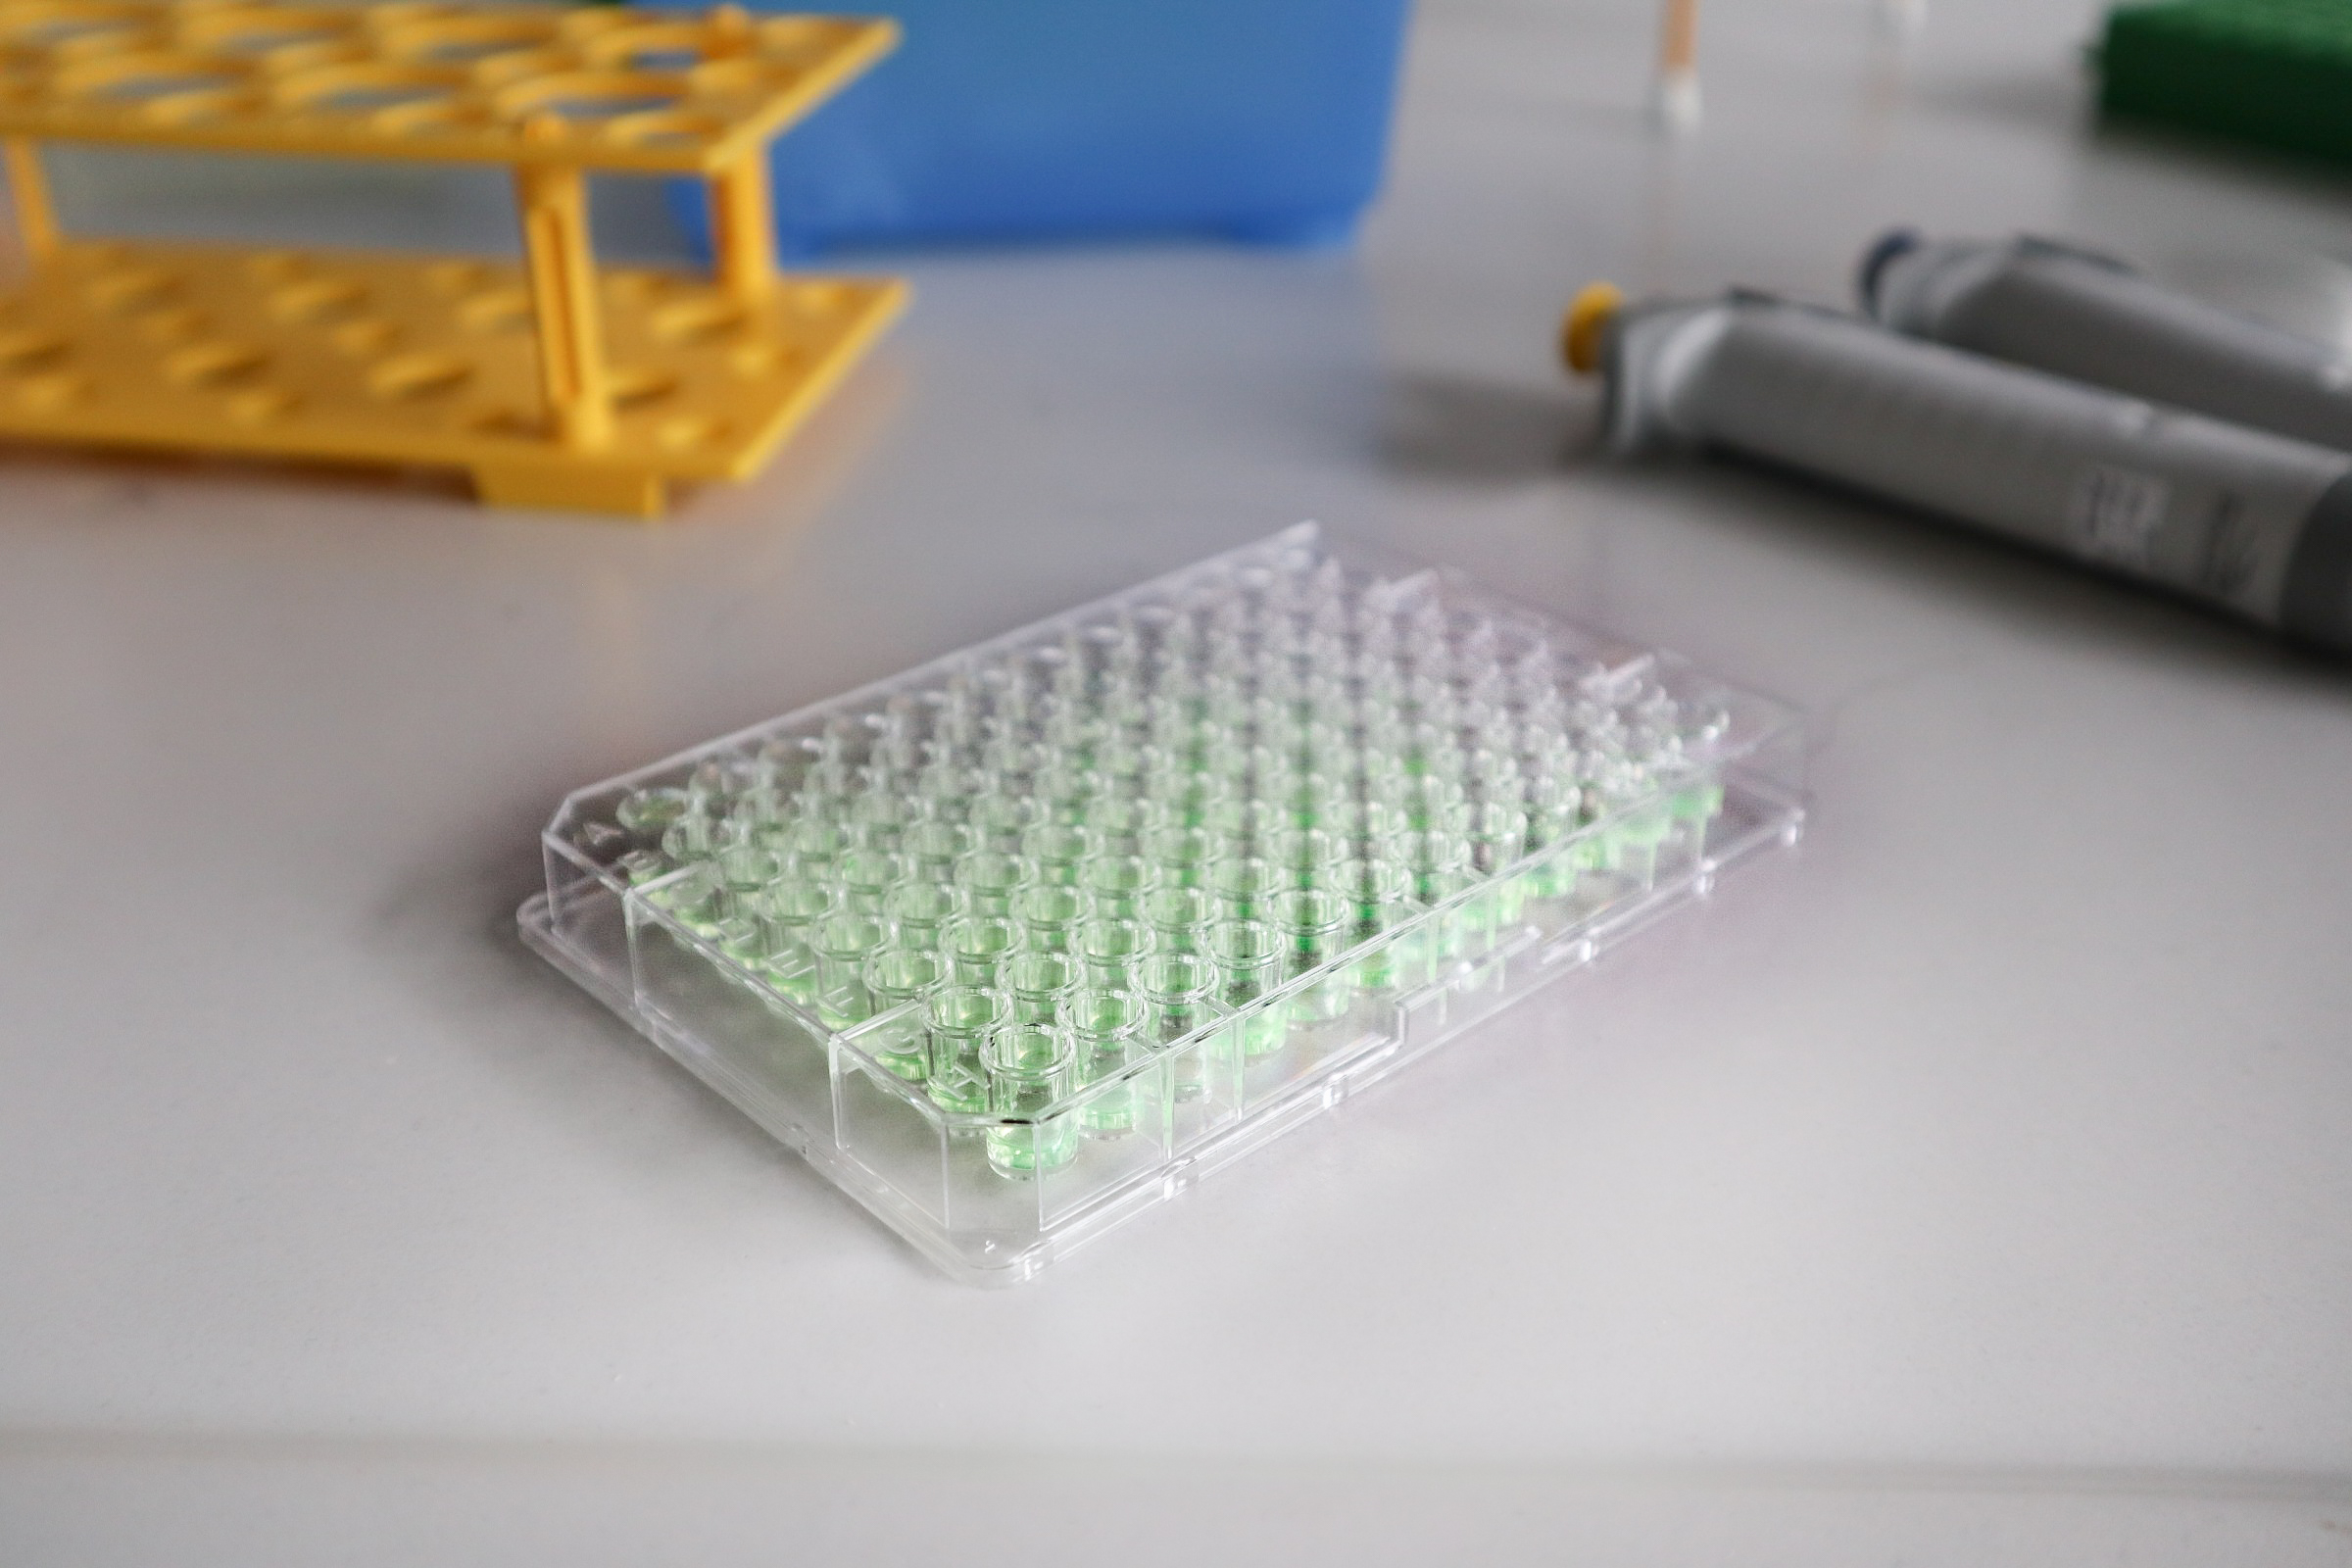 GFP-Trap 96-well Plate for for convenient high throughput analysis.